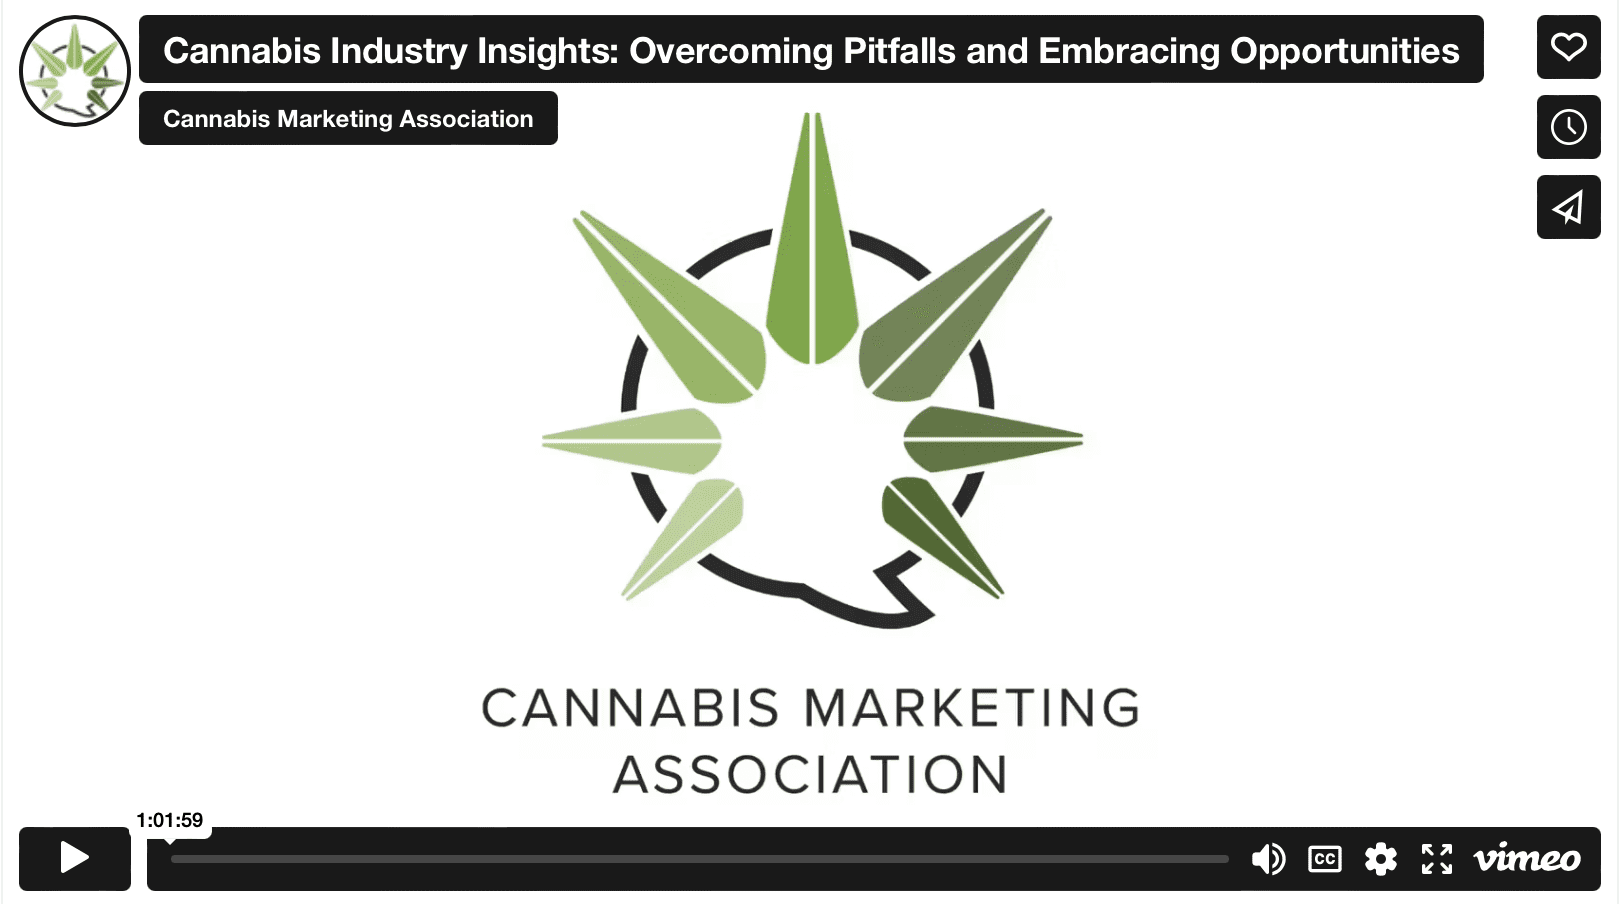 Cannabis Industry Insights: Overcoming Pitfalls and Embracing Opportunities